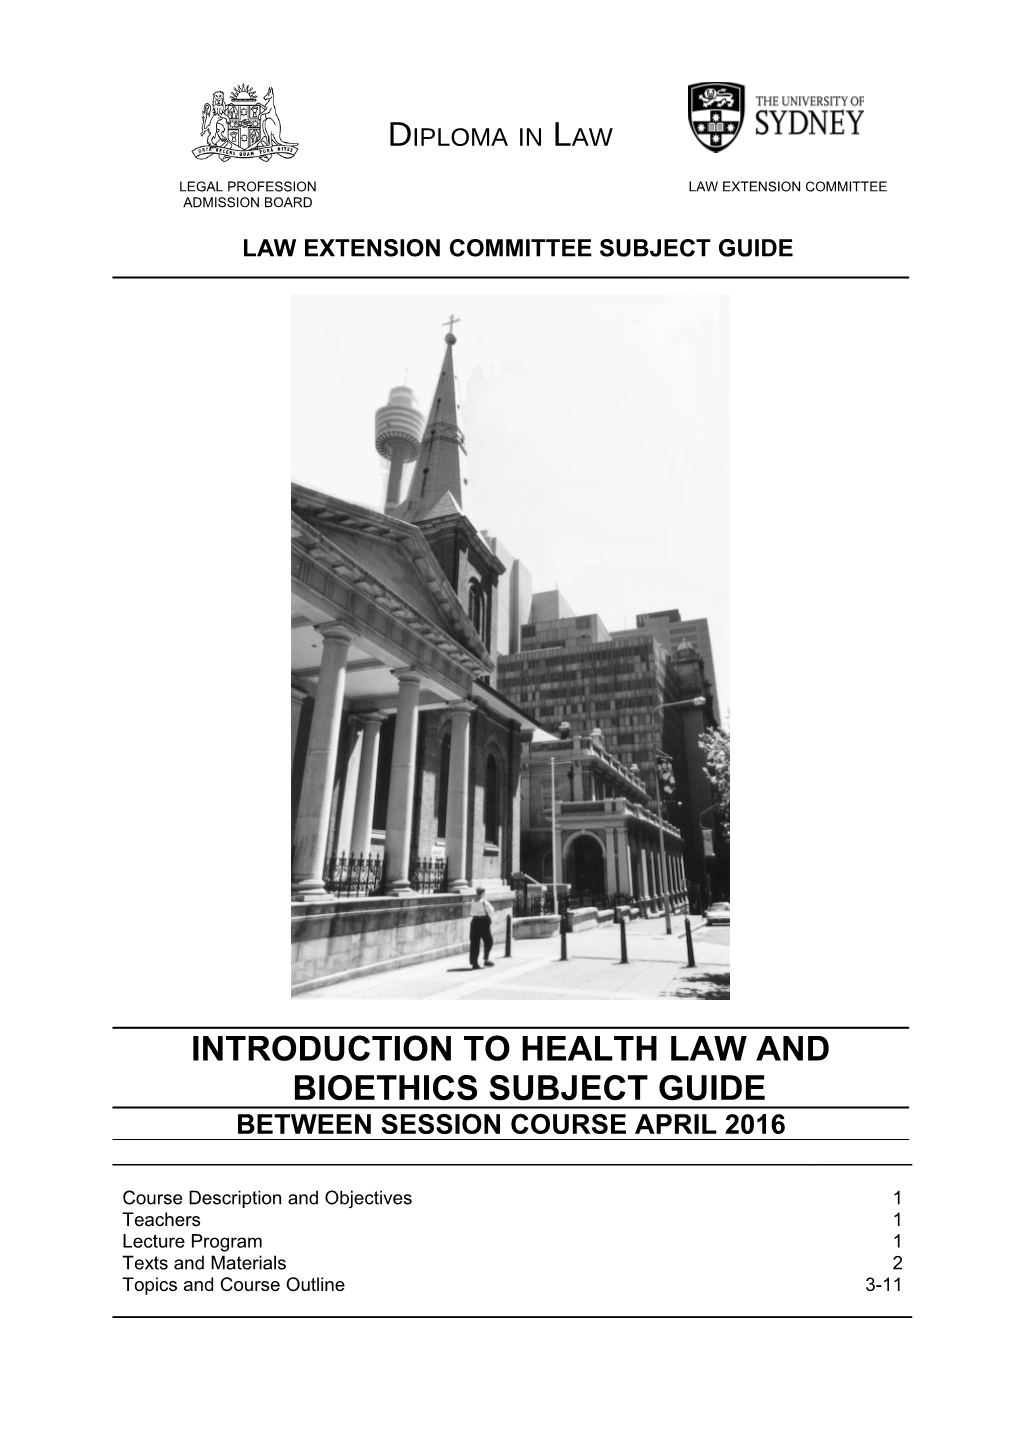 Introduction to Health Law and Bioethics Subject Guide